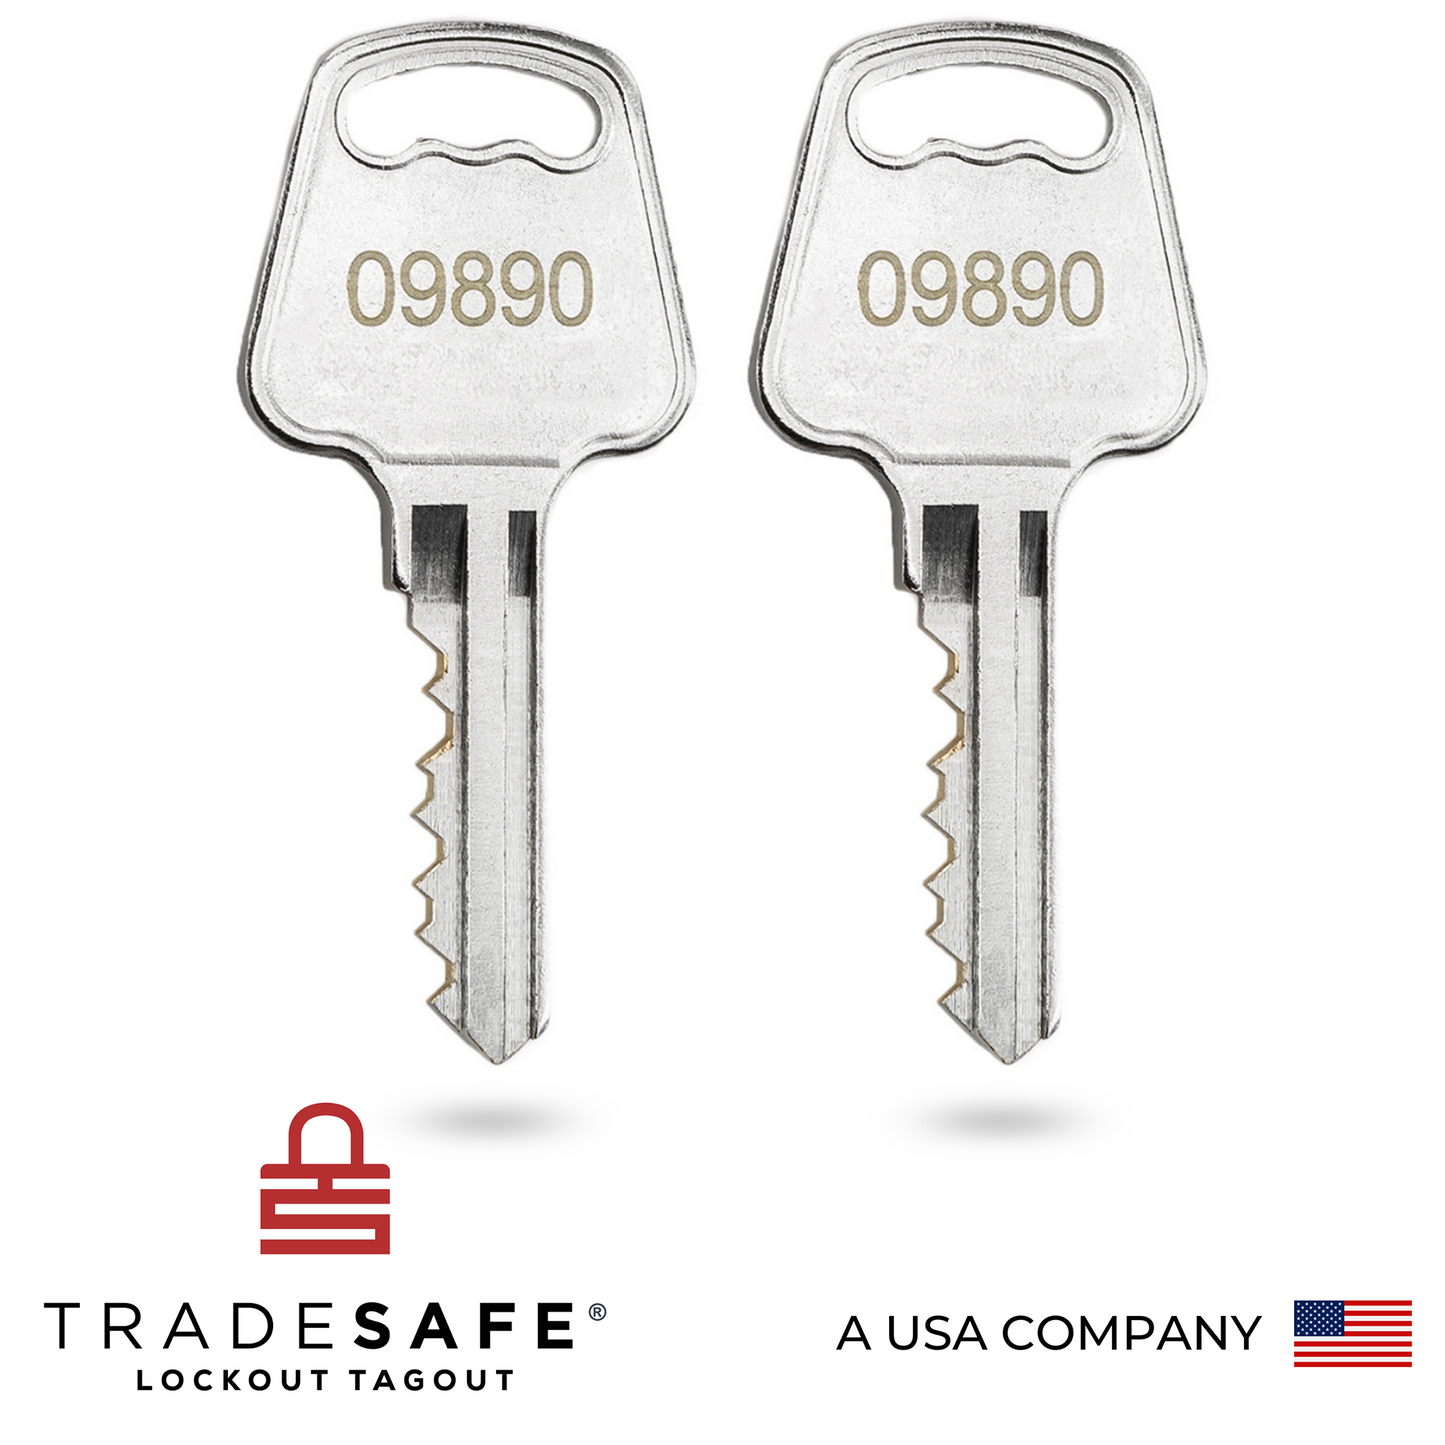 two keys, each with the five-digit code 09890